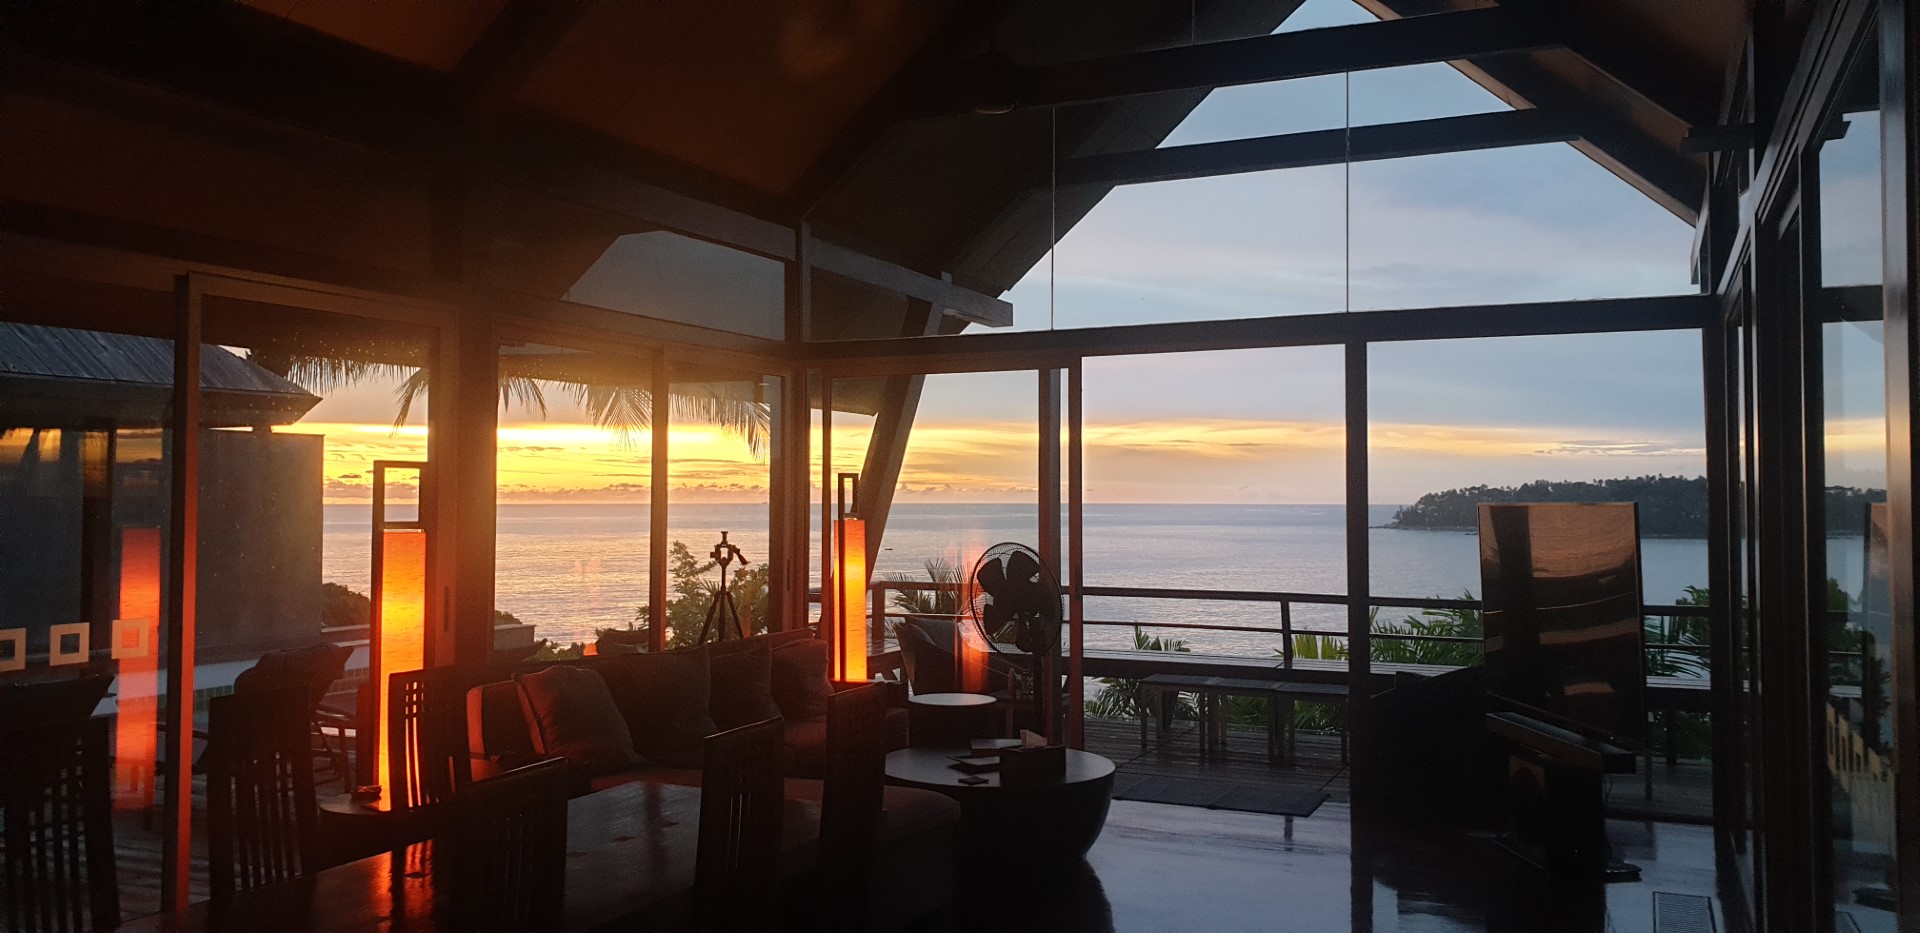 Sunset view from main room.jpg